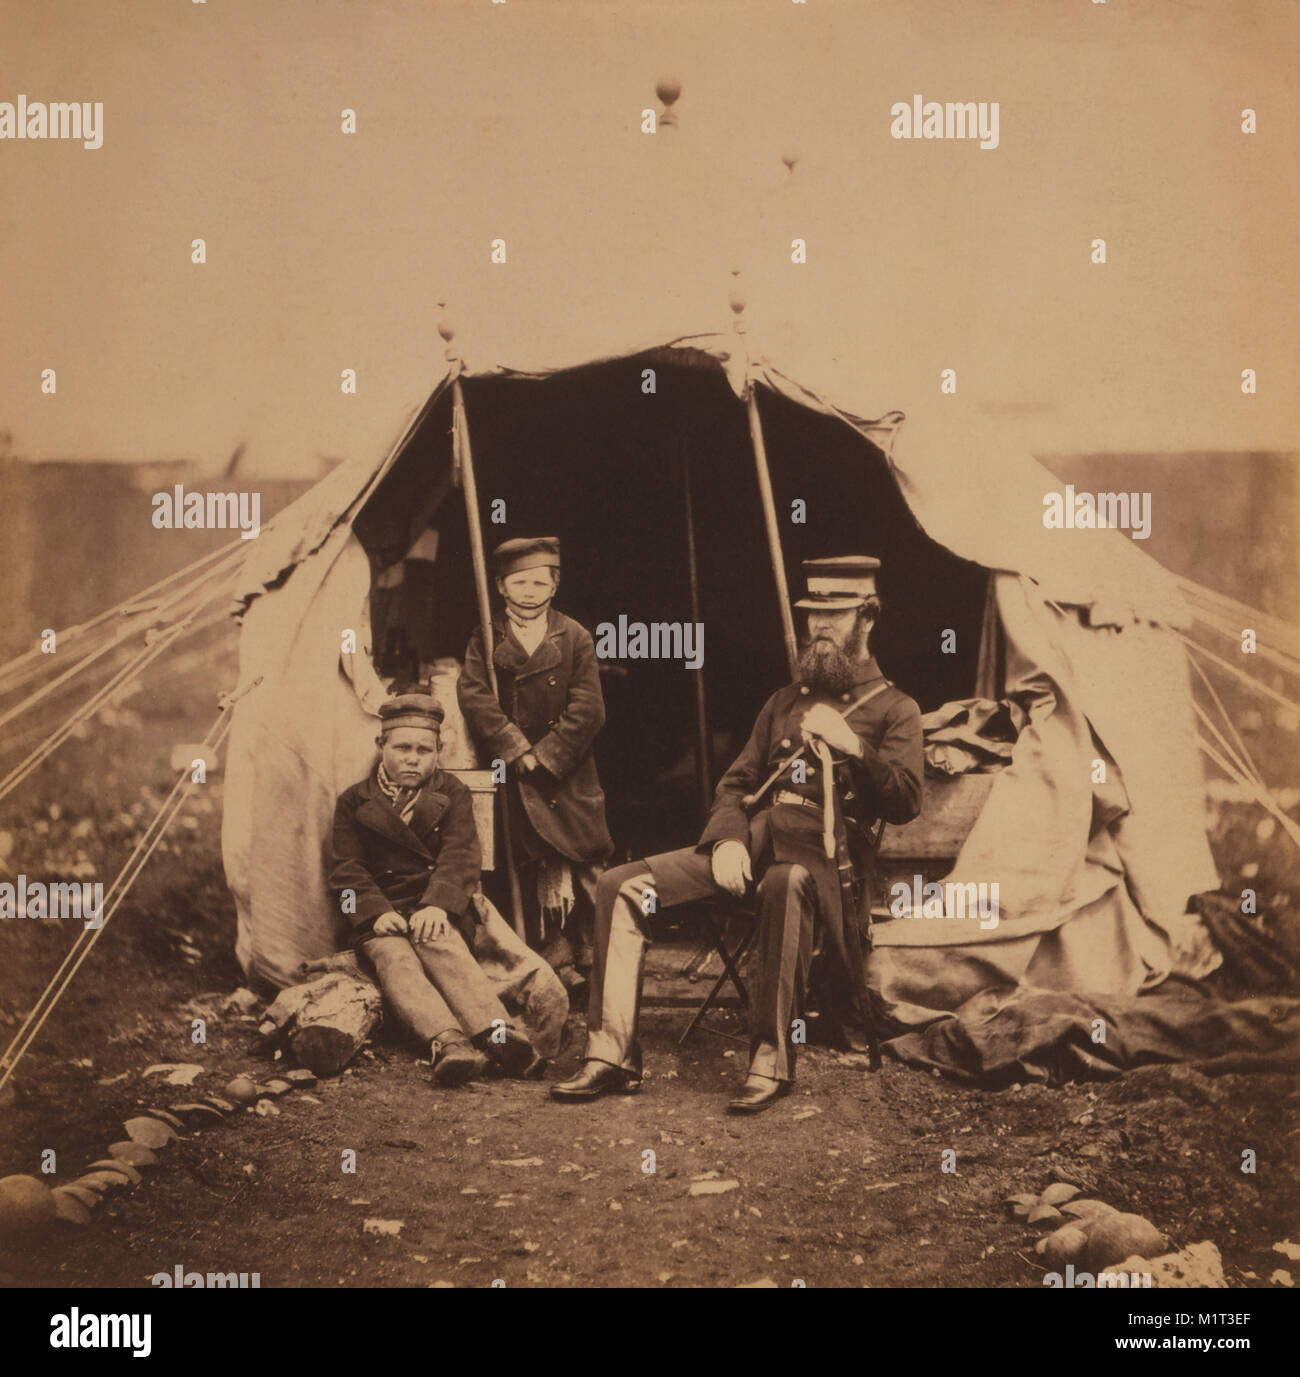 British Colonel Studholme Brownrigg with two Captured Russian Boys, Portrait at Entrance to Tent, Crimean War, Crimea, Ukraine, by Roger Fenton, 1855 Stock Photo